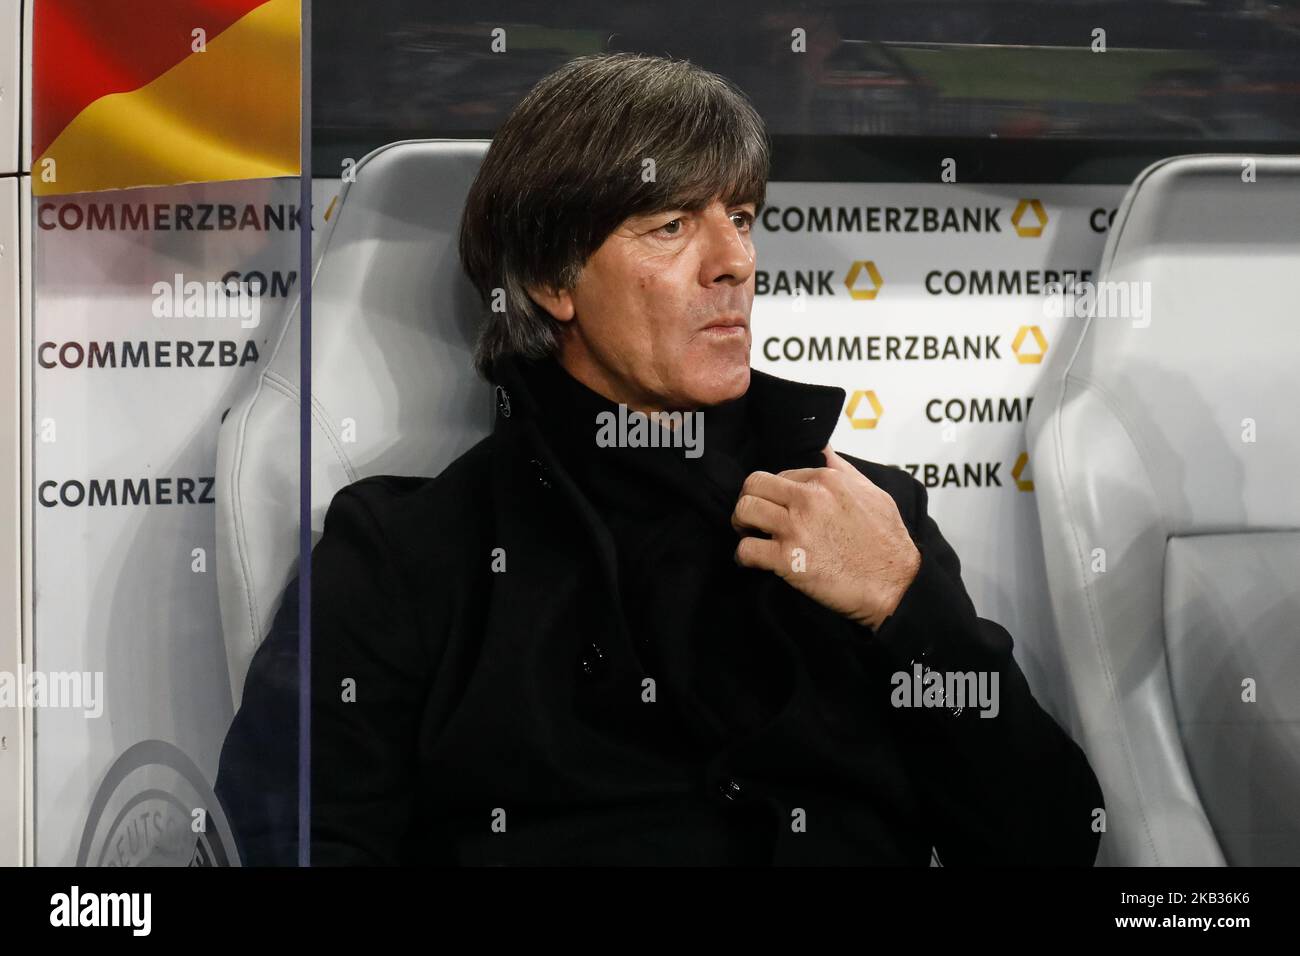 Germany head coach Joachim Loew looks on during the international friendly match between Germany and Russia on November 15, 2018 at Red Bull Arena in Leipzig, Germany. (Photo by Mike Kireev/NurPhoto) Stock Photo